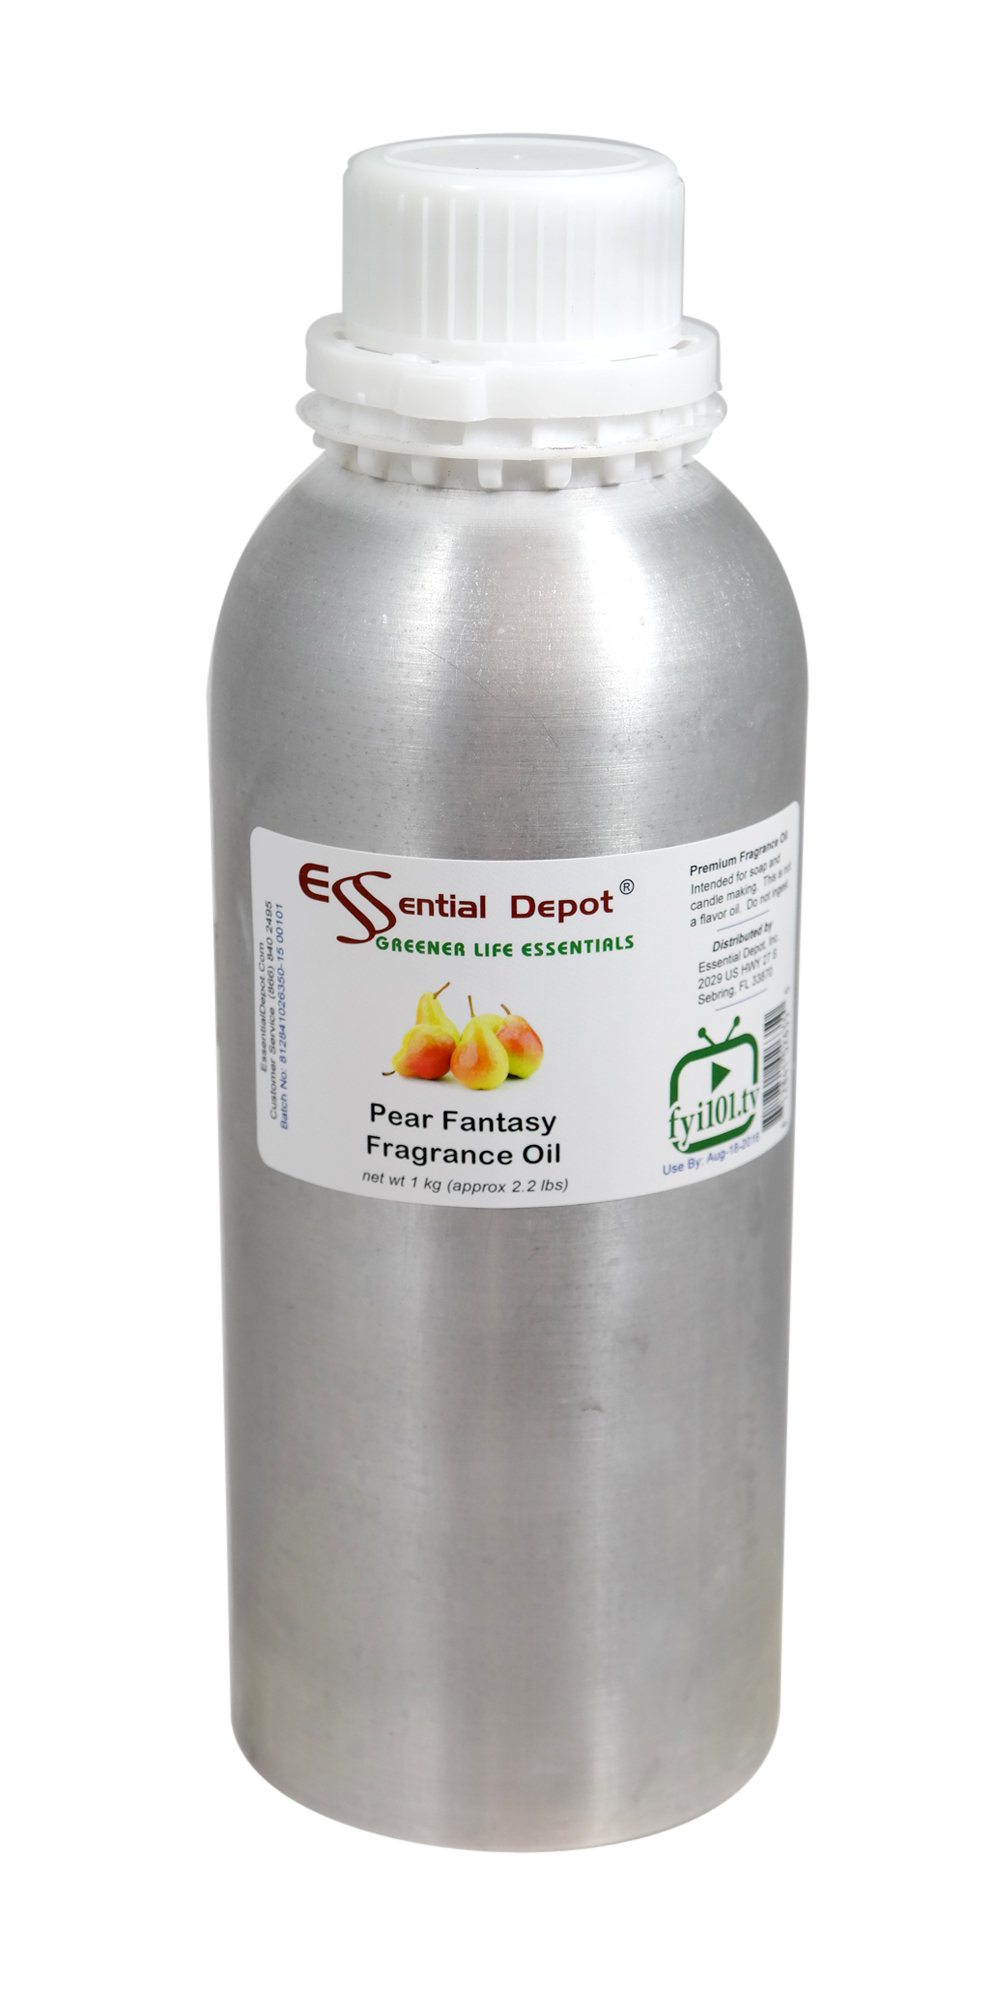 Pear Fantasy Fragrance Oil - 1 kg. - Approx 2.2 lbs. - FREE US SHIPPING